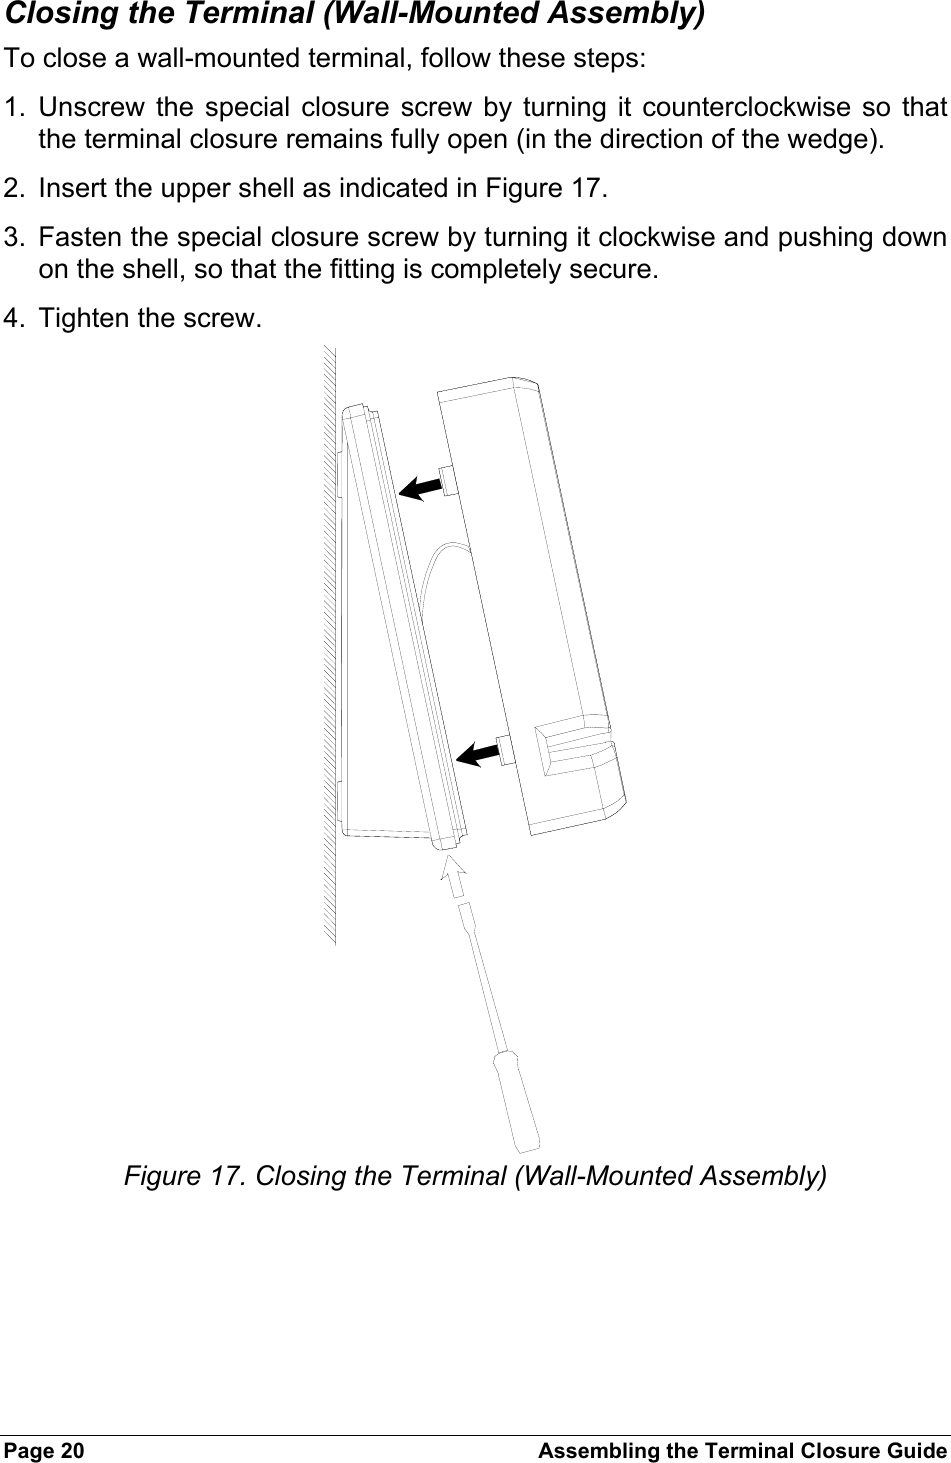 Page 20  Assembling the Terminal Closure Guide Closing the Terminal (Wall-Mounted Assembly) To close a wall-mounted terminal, follow these steps: 1. Unscrew the special closure screw by turning it counterclockwise so that the terminal closure remains fully open (in the direction of the wedge). 2.  Insert the upper shell as indicated in Figure 17. 3.  Fasten the special closure screw by turning it clockwise and pushing down on the shell, so that the fitting is completely secure. 4.  Tighten the screw.  Figure 17. Closing the Terminal (Wall-Mounted Assembly) 